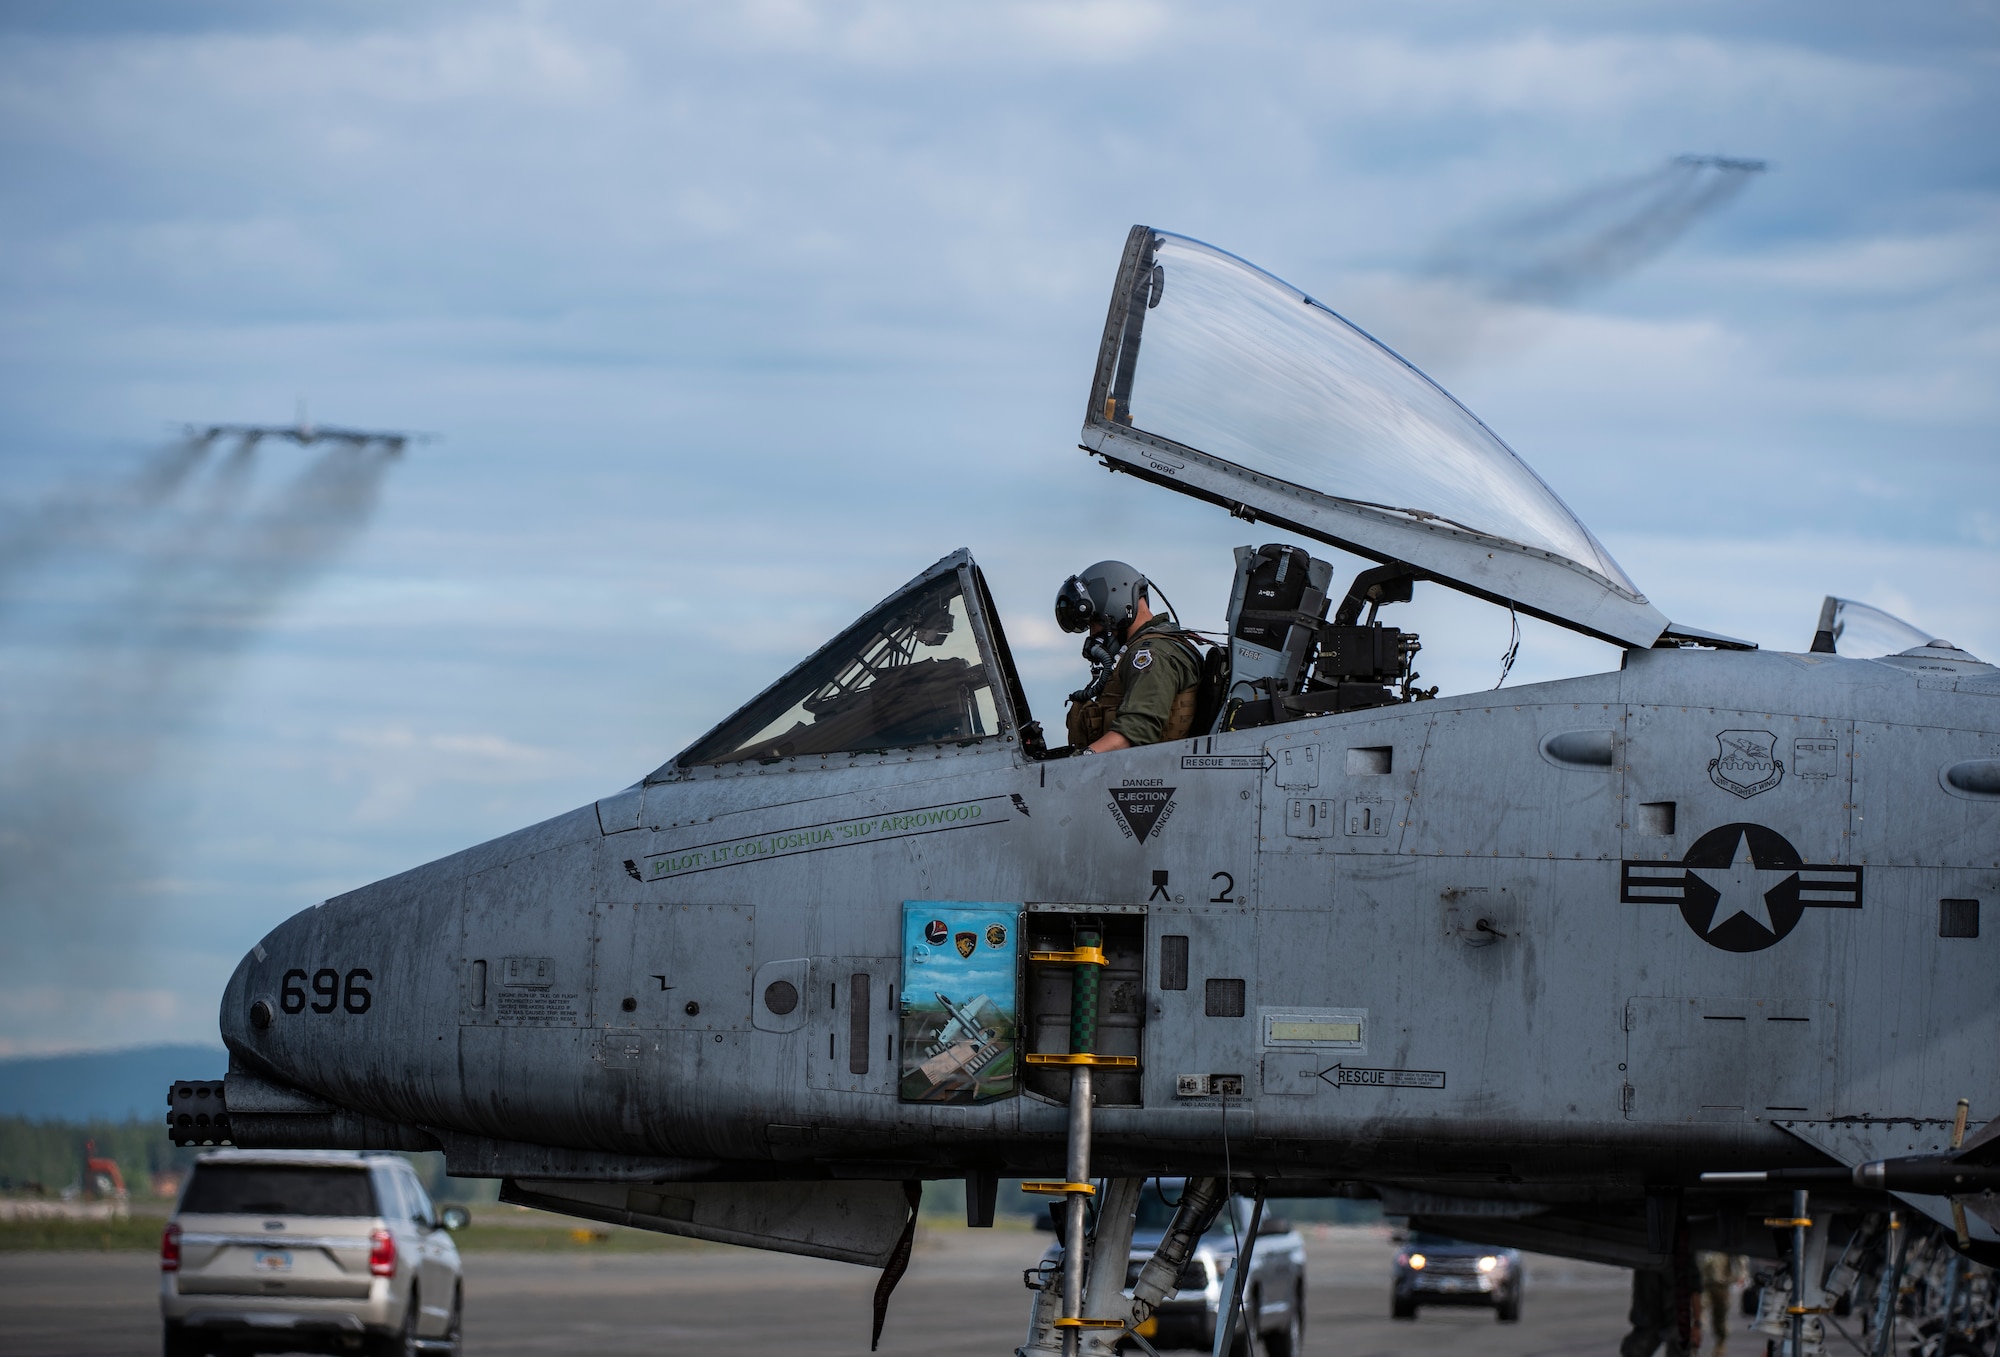 An A-10 Thunderbolt pilot from the 25th Fighter Squadron, Osan Air Base, Republic of Korea, performs pre-flight checks at Eielson Air Force Base, Alaska, June 10, 2019. The 25th FS is participating in Exercise Red Flag-Alaska 19-2, a large-scale training exercise, with units and allied nation's’ air forces from around the Pacific. (U.S. Air Force photo by Senior Airman Stefan Alvarez)